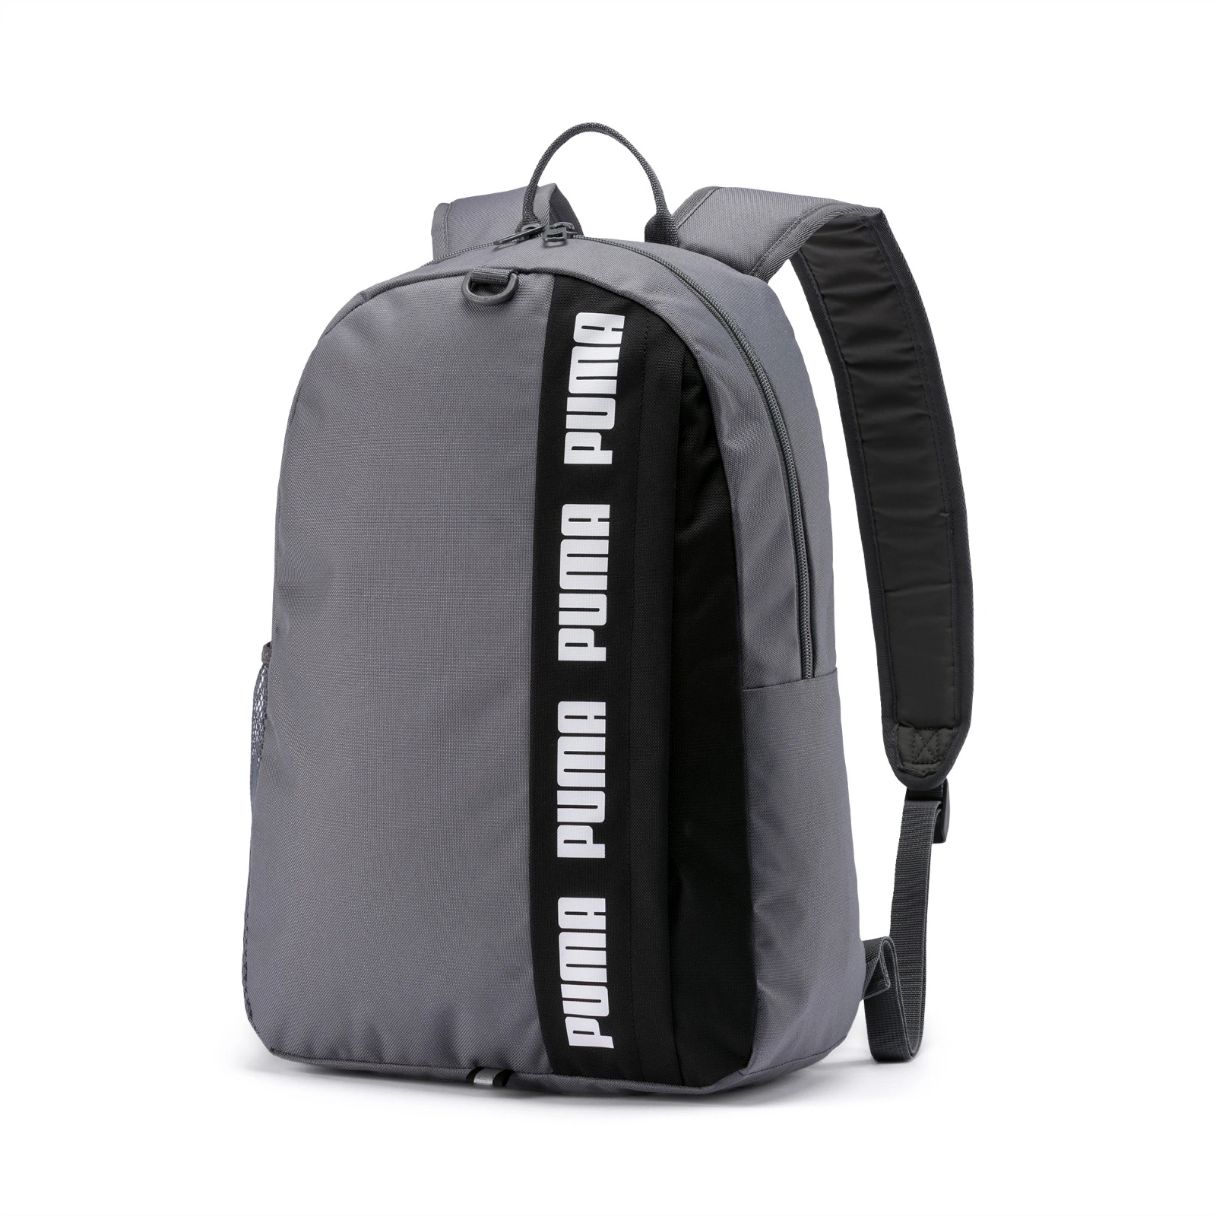 Backpack - Phase Backpack, net weight 0.284 kg